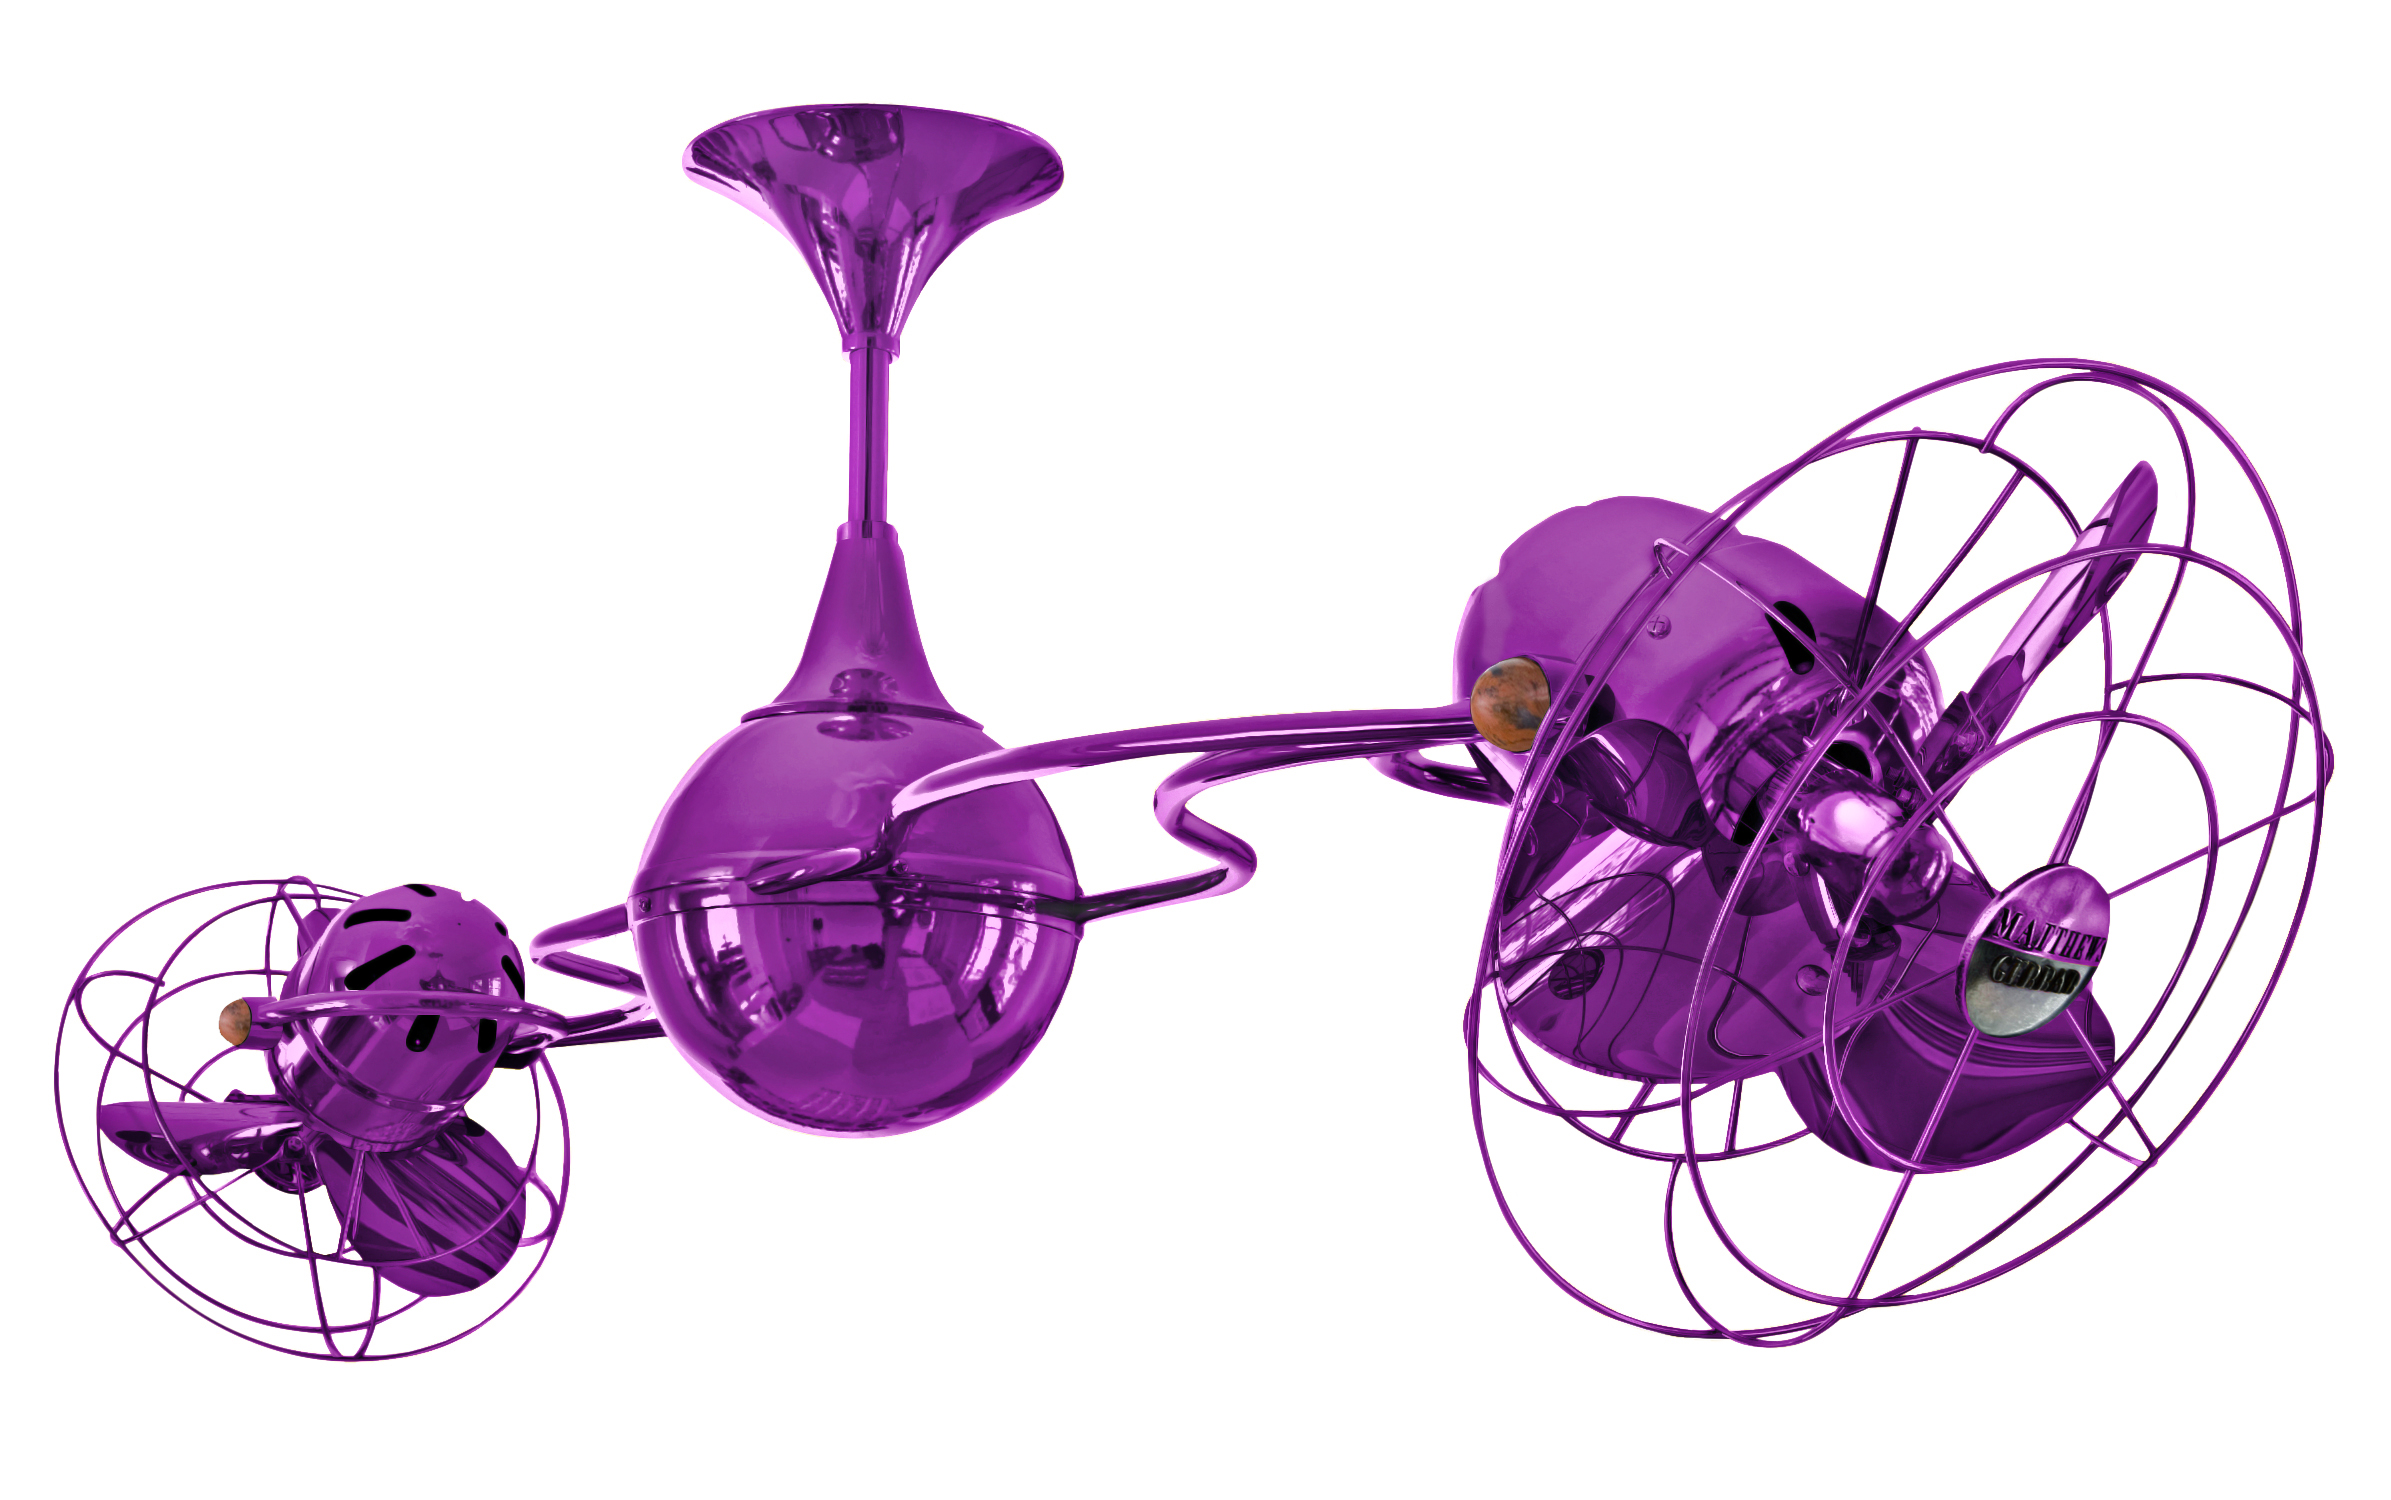 Italo Ventania rotational dual head ceiling fan in Light Purple / Ametista finish with Metal blades and decorative cage made by Matthews Fan Company.